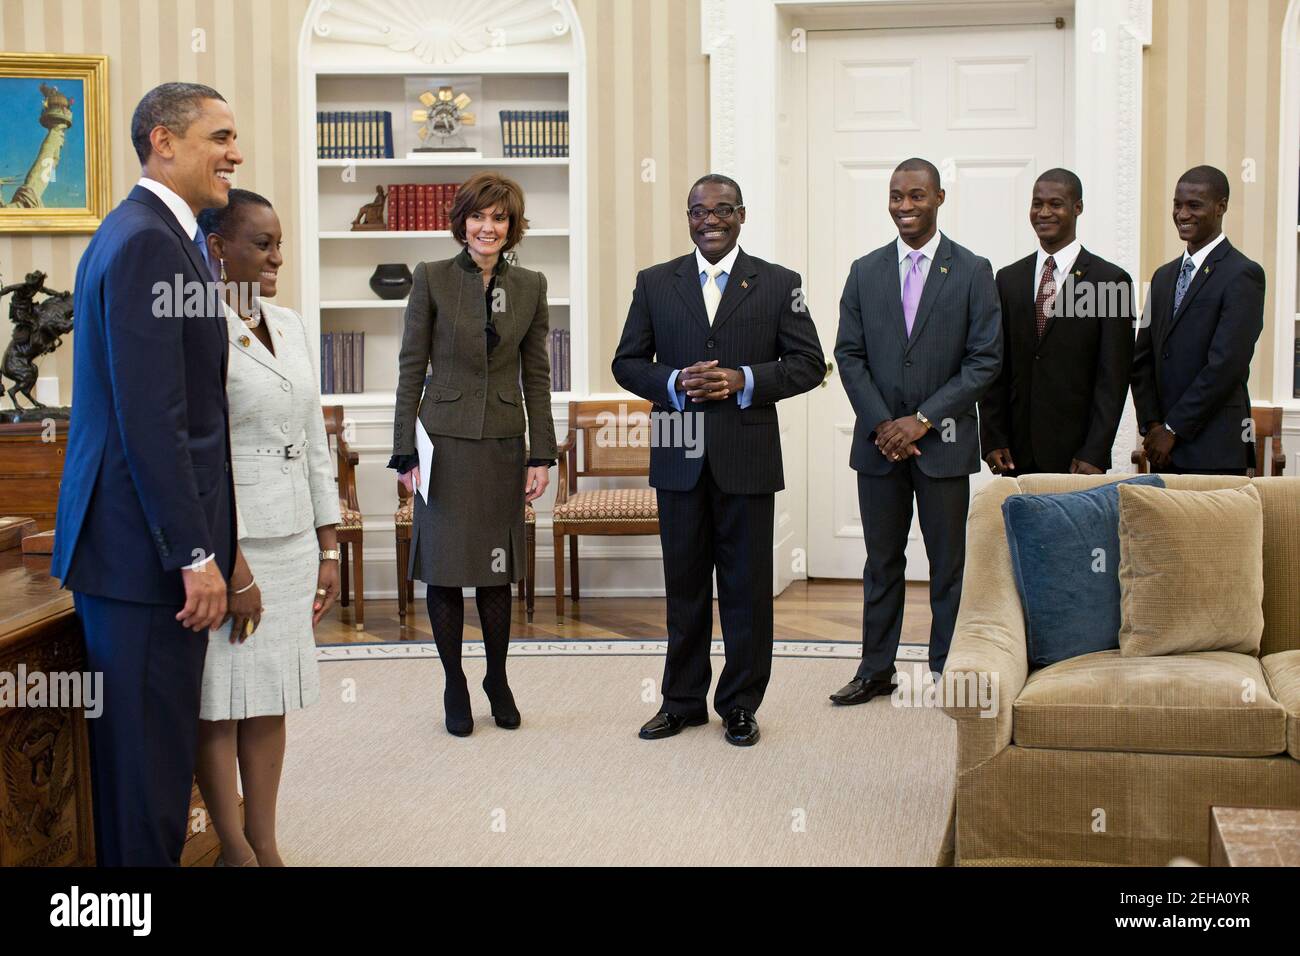 President Barack Obama poses for a photograph with Ambassador Jacinth Lorna Henry-Martin of St. Kitts and Nevis during an ambassador credentialing ceremony in the Oval Office, Feb. 23, 2011. Chief of Protocol Capricia Marshall and members of Henry-Martin's family watch from the edge of the room. Stock Photo